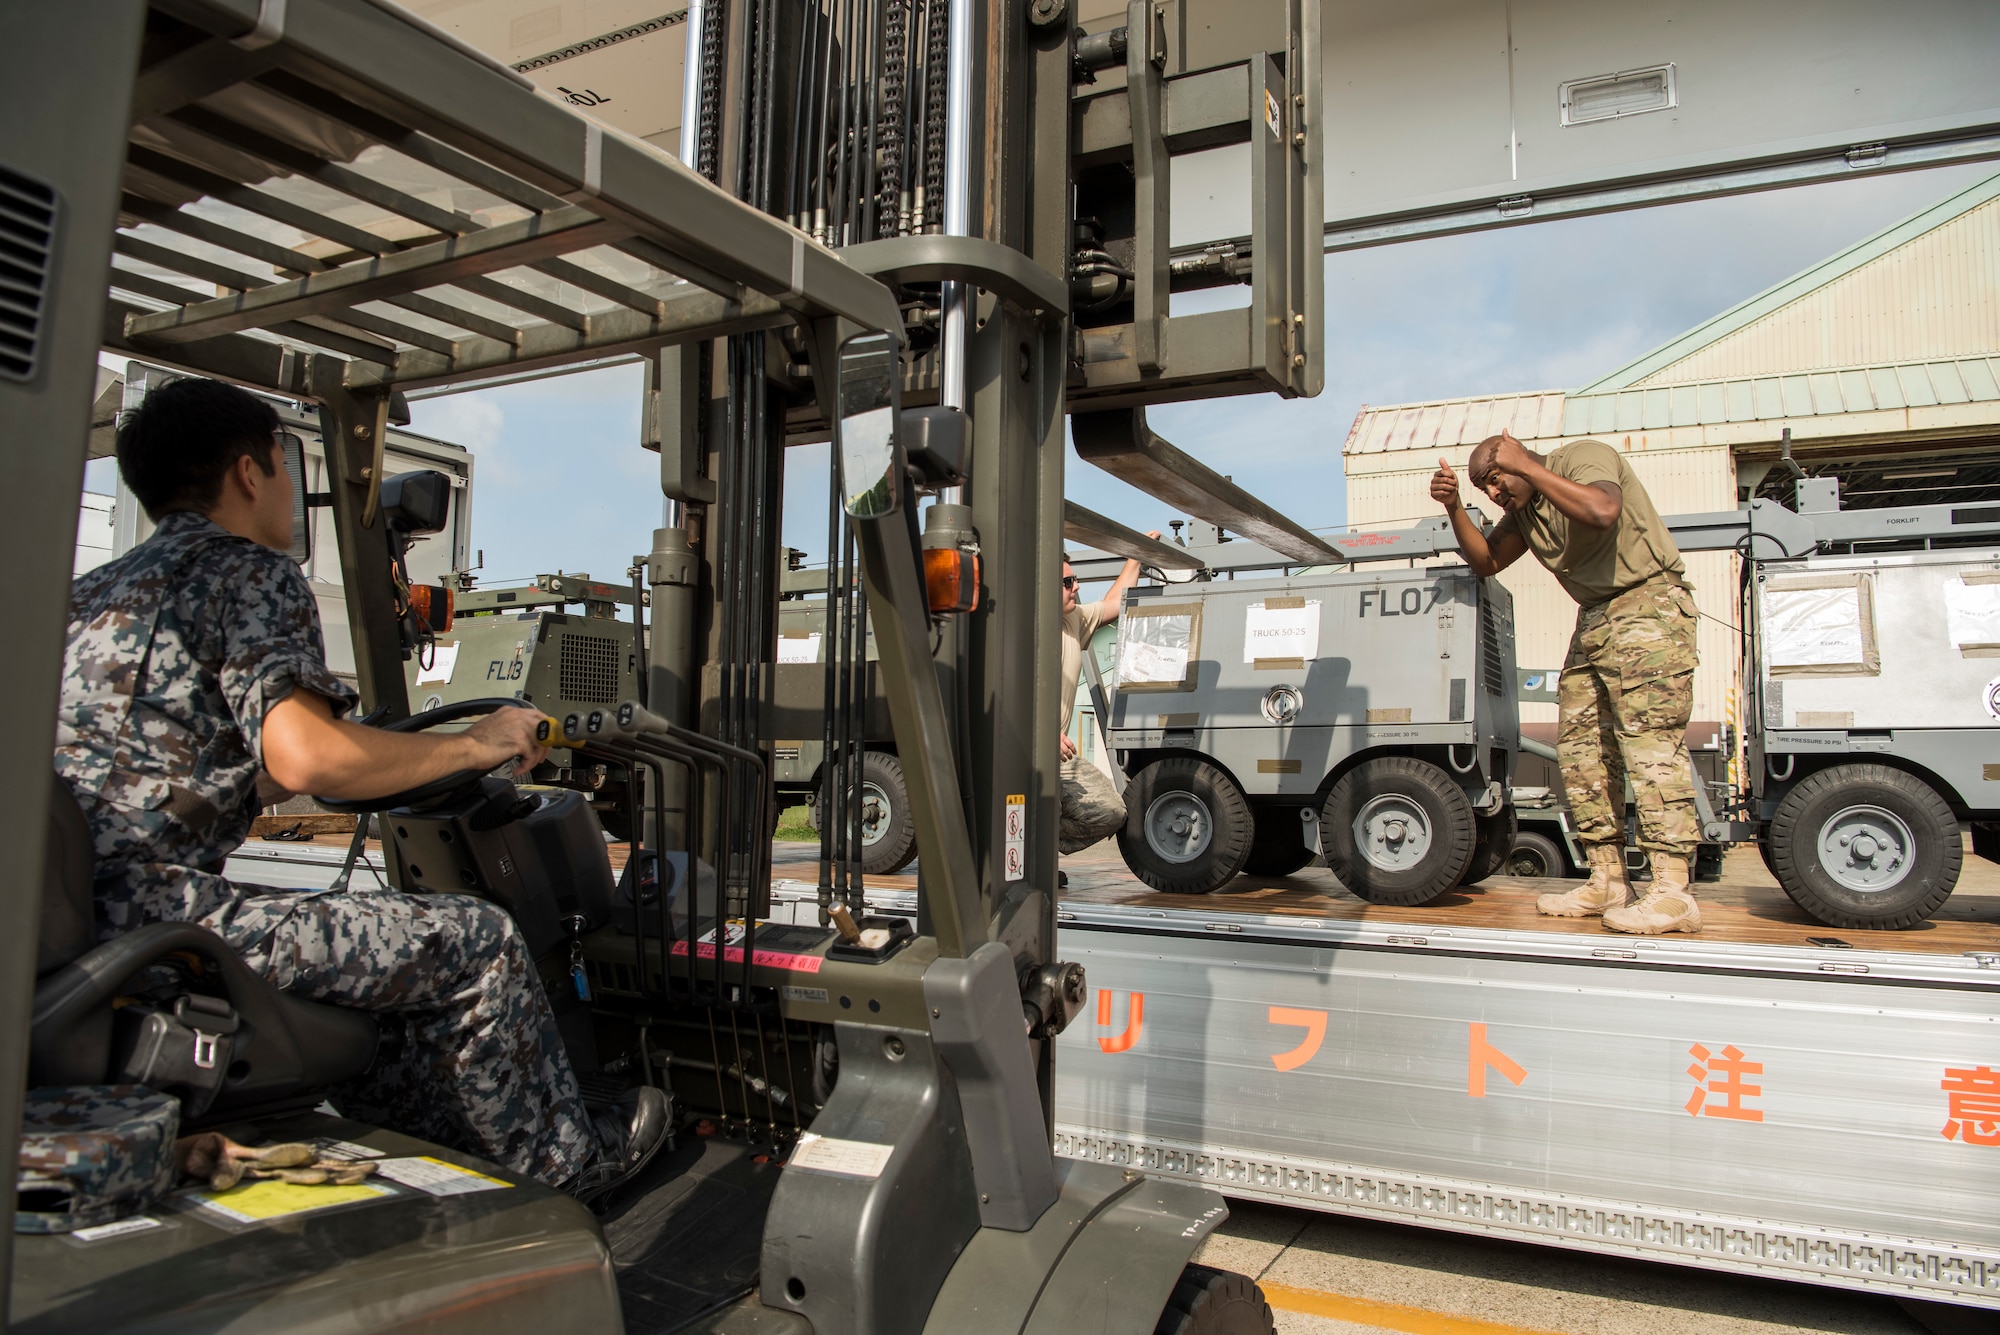 U.S. Air Force Staff Sgt. Edwin Long, a 35th Logistic Readiness Squadron traffic management office outbound cargo supervisor, gives a Japan Air Self-Defense Force member a thumbs up while unloading cargo during an aviation training relocation at Komatsu Air Base, Japan, Sept. 30, 2019. During the week-long exercise, participants facilitated F-16 maintenance training, communication practice and bilateral maintenance equipment sharing. (U.S. Air Force photo by Senior Airman Collette Brooks)